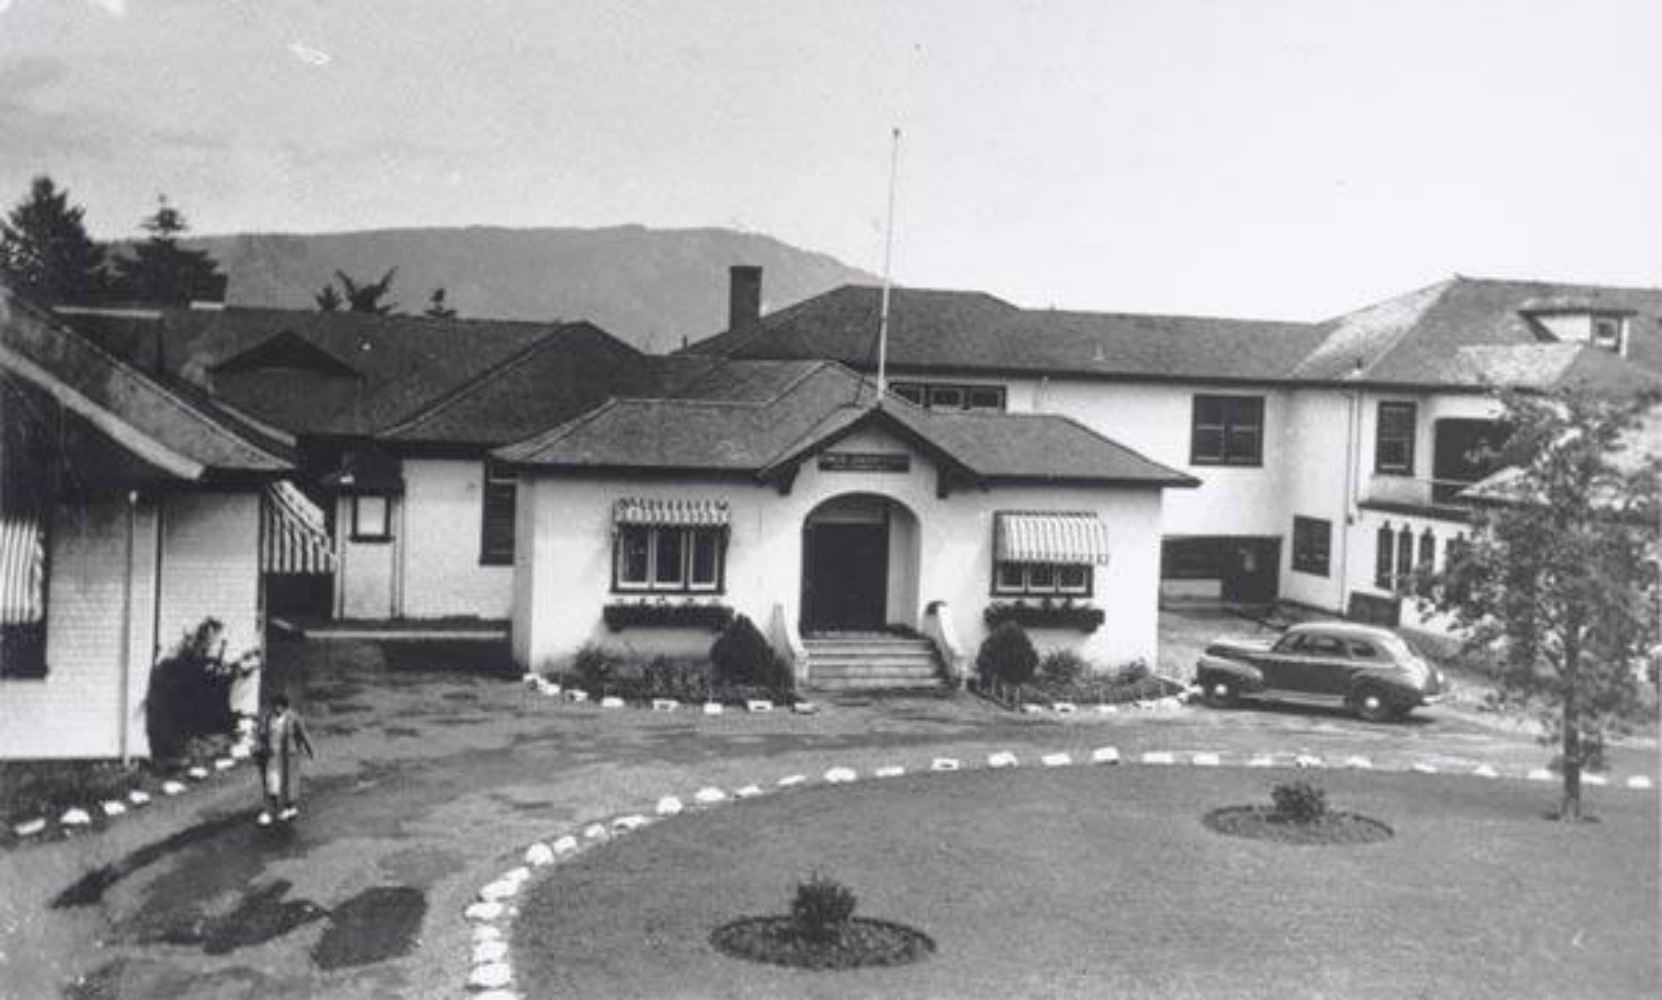 King's Daughters' Hospital, Duncan, B.C., circa 1940. This building has since been demolished and replaced by the Cairnsmore long term care facility.